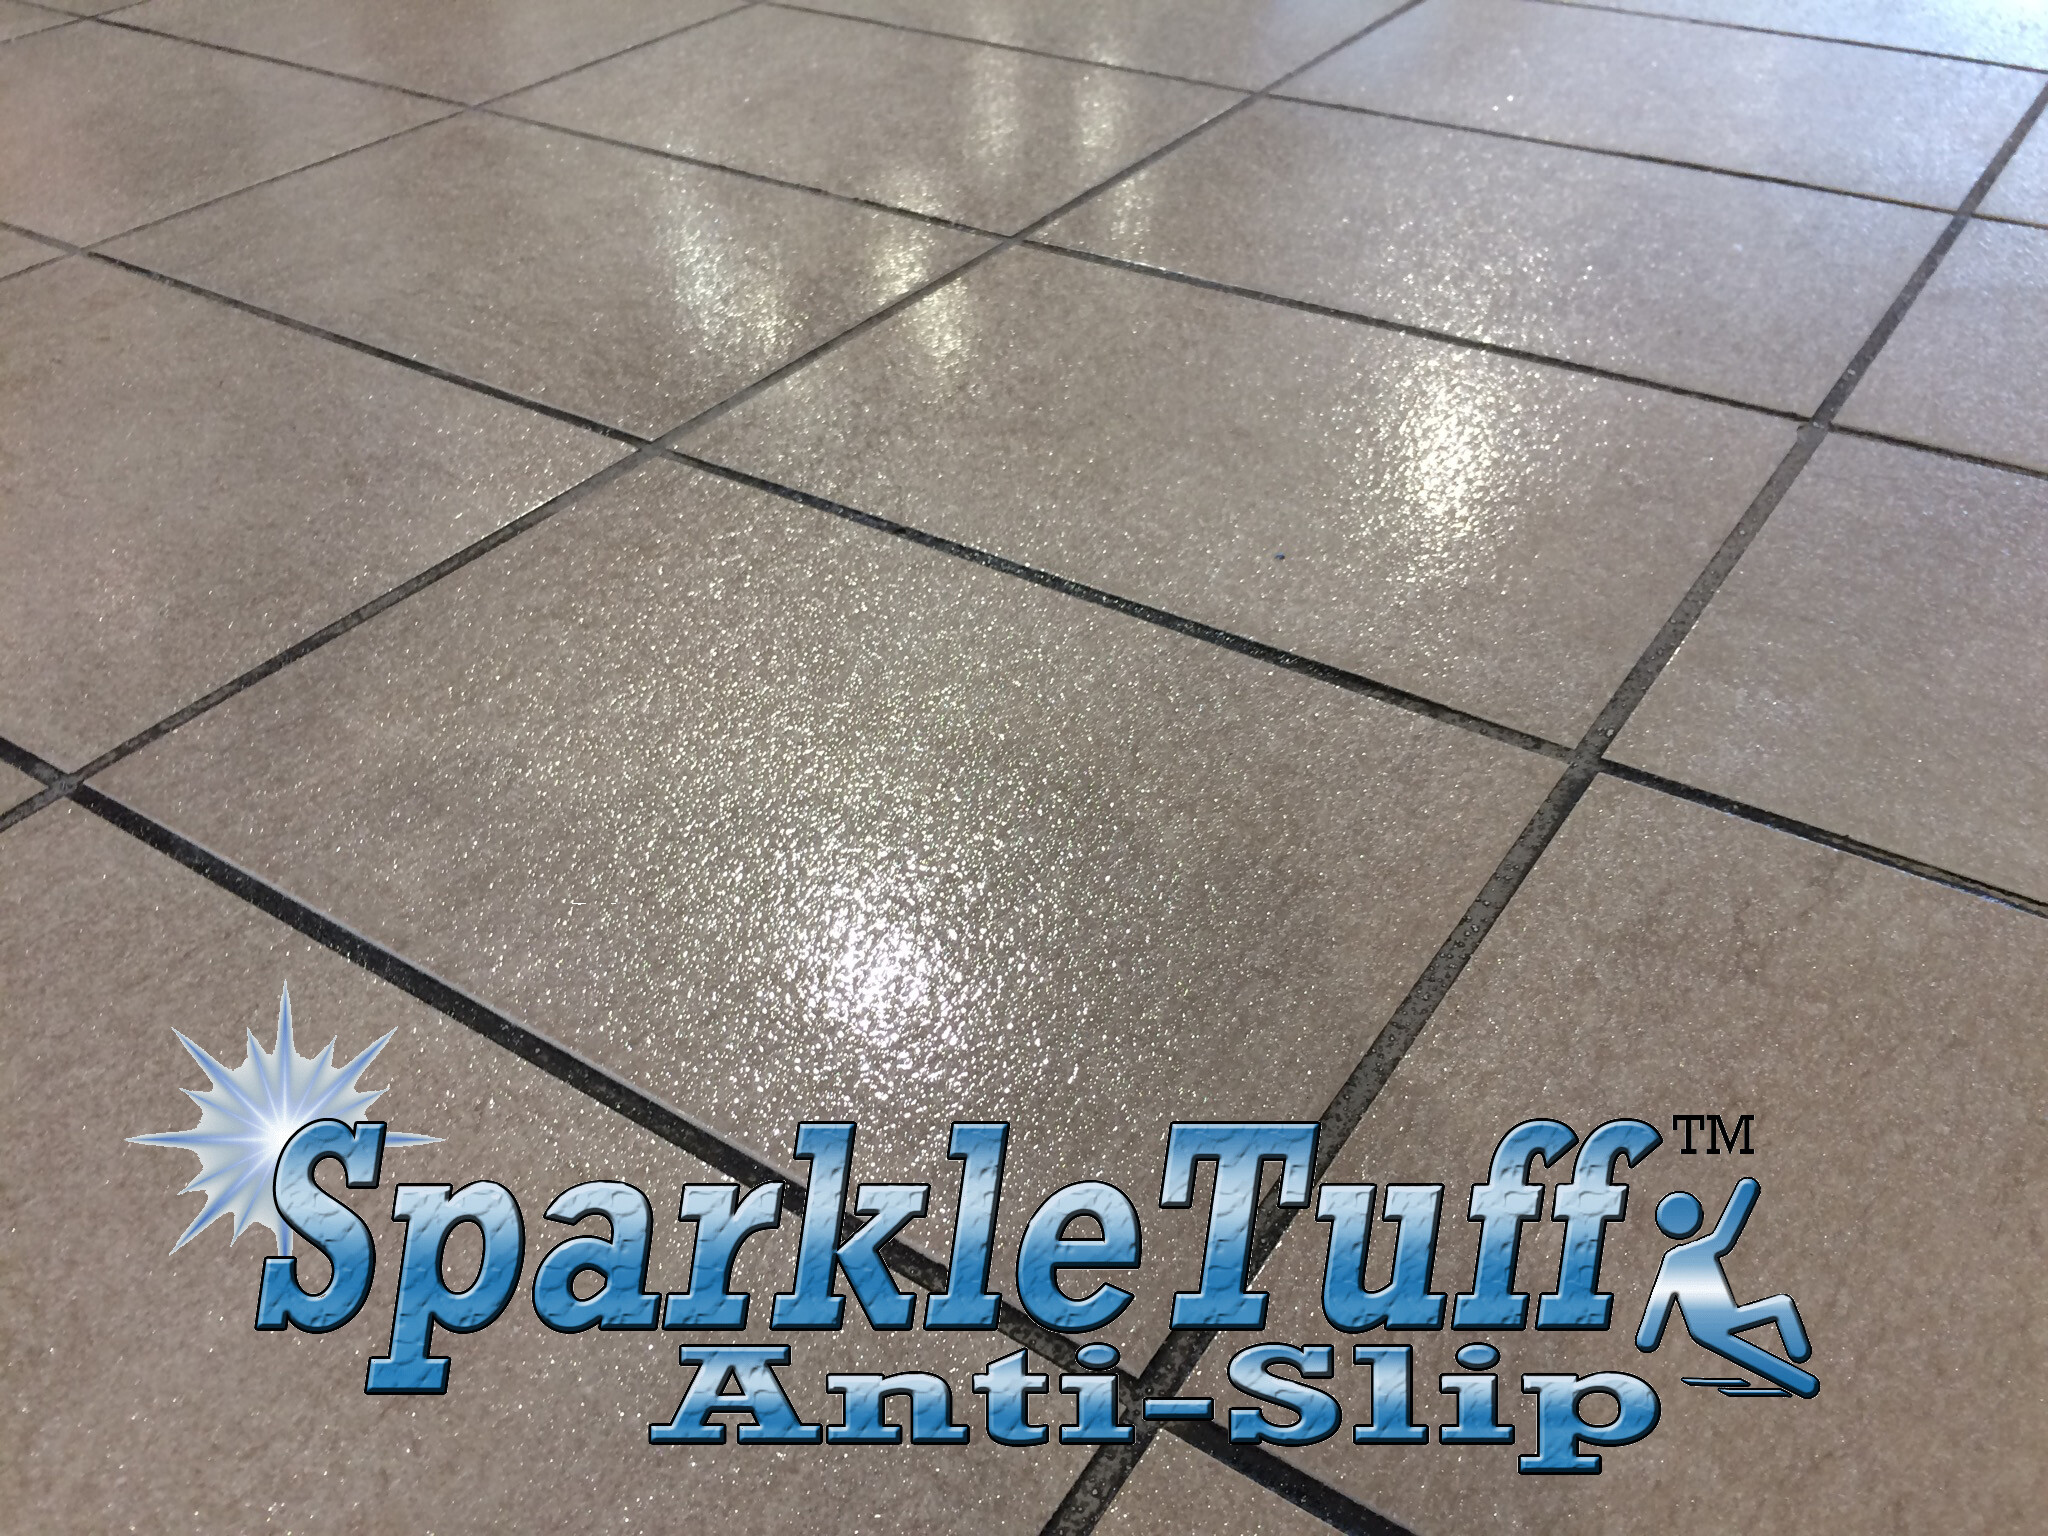 Sparkletuff Anti Slip Floor Coating, How To Stop A Tile Floor From Being Slippery